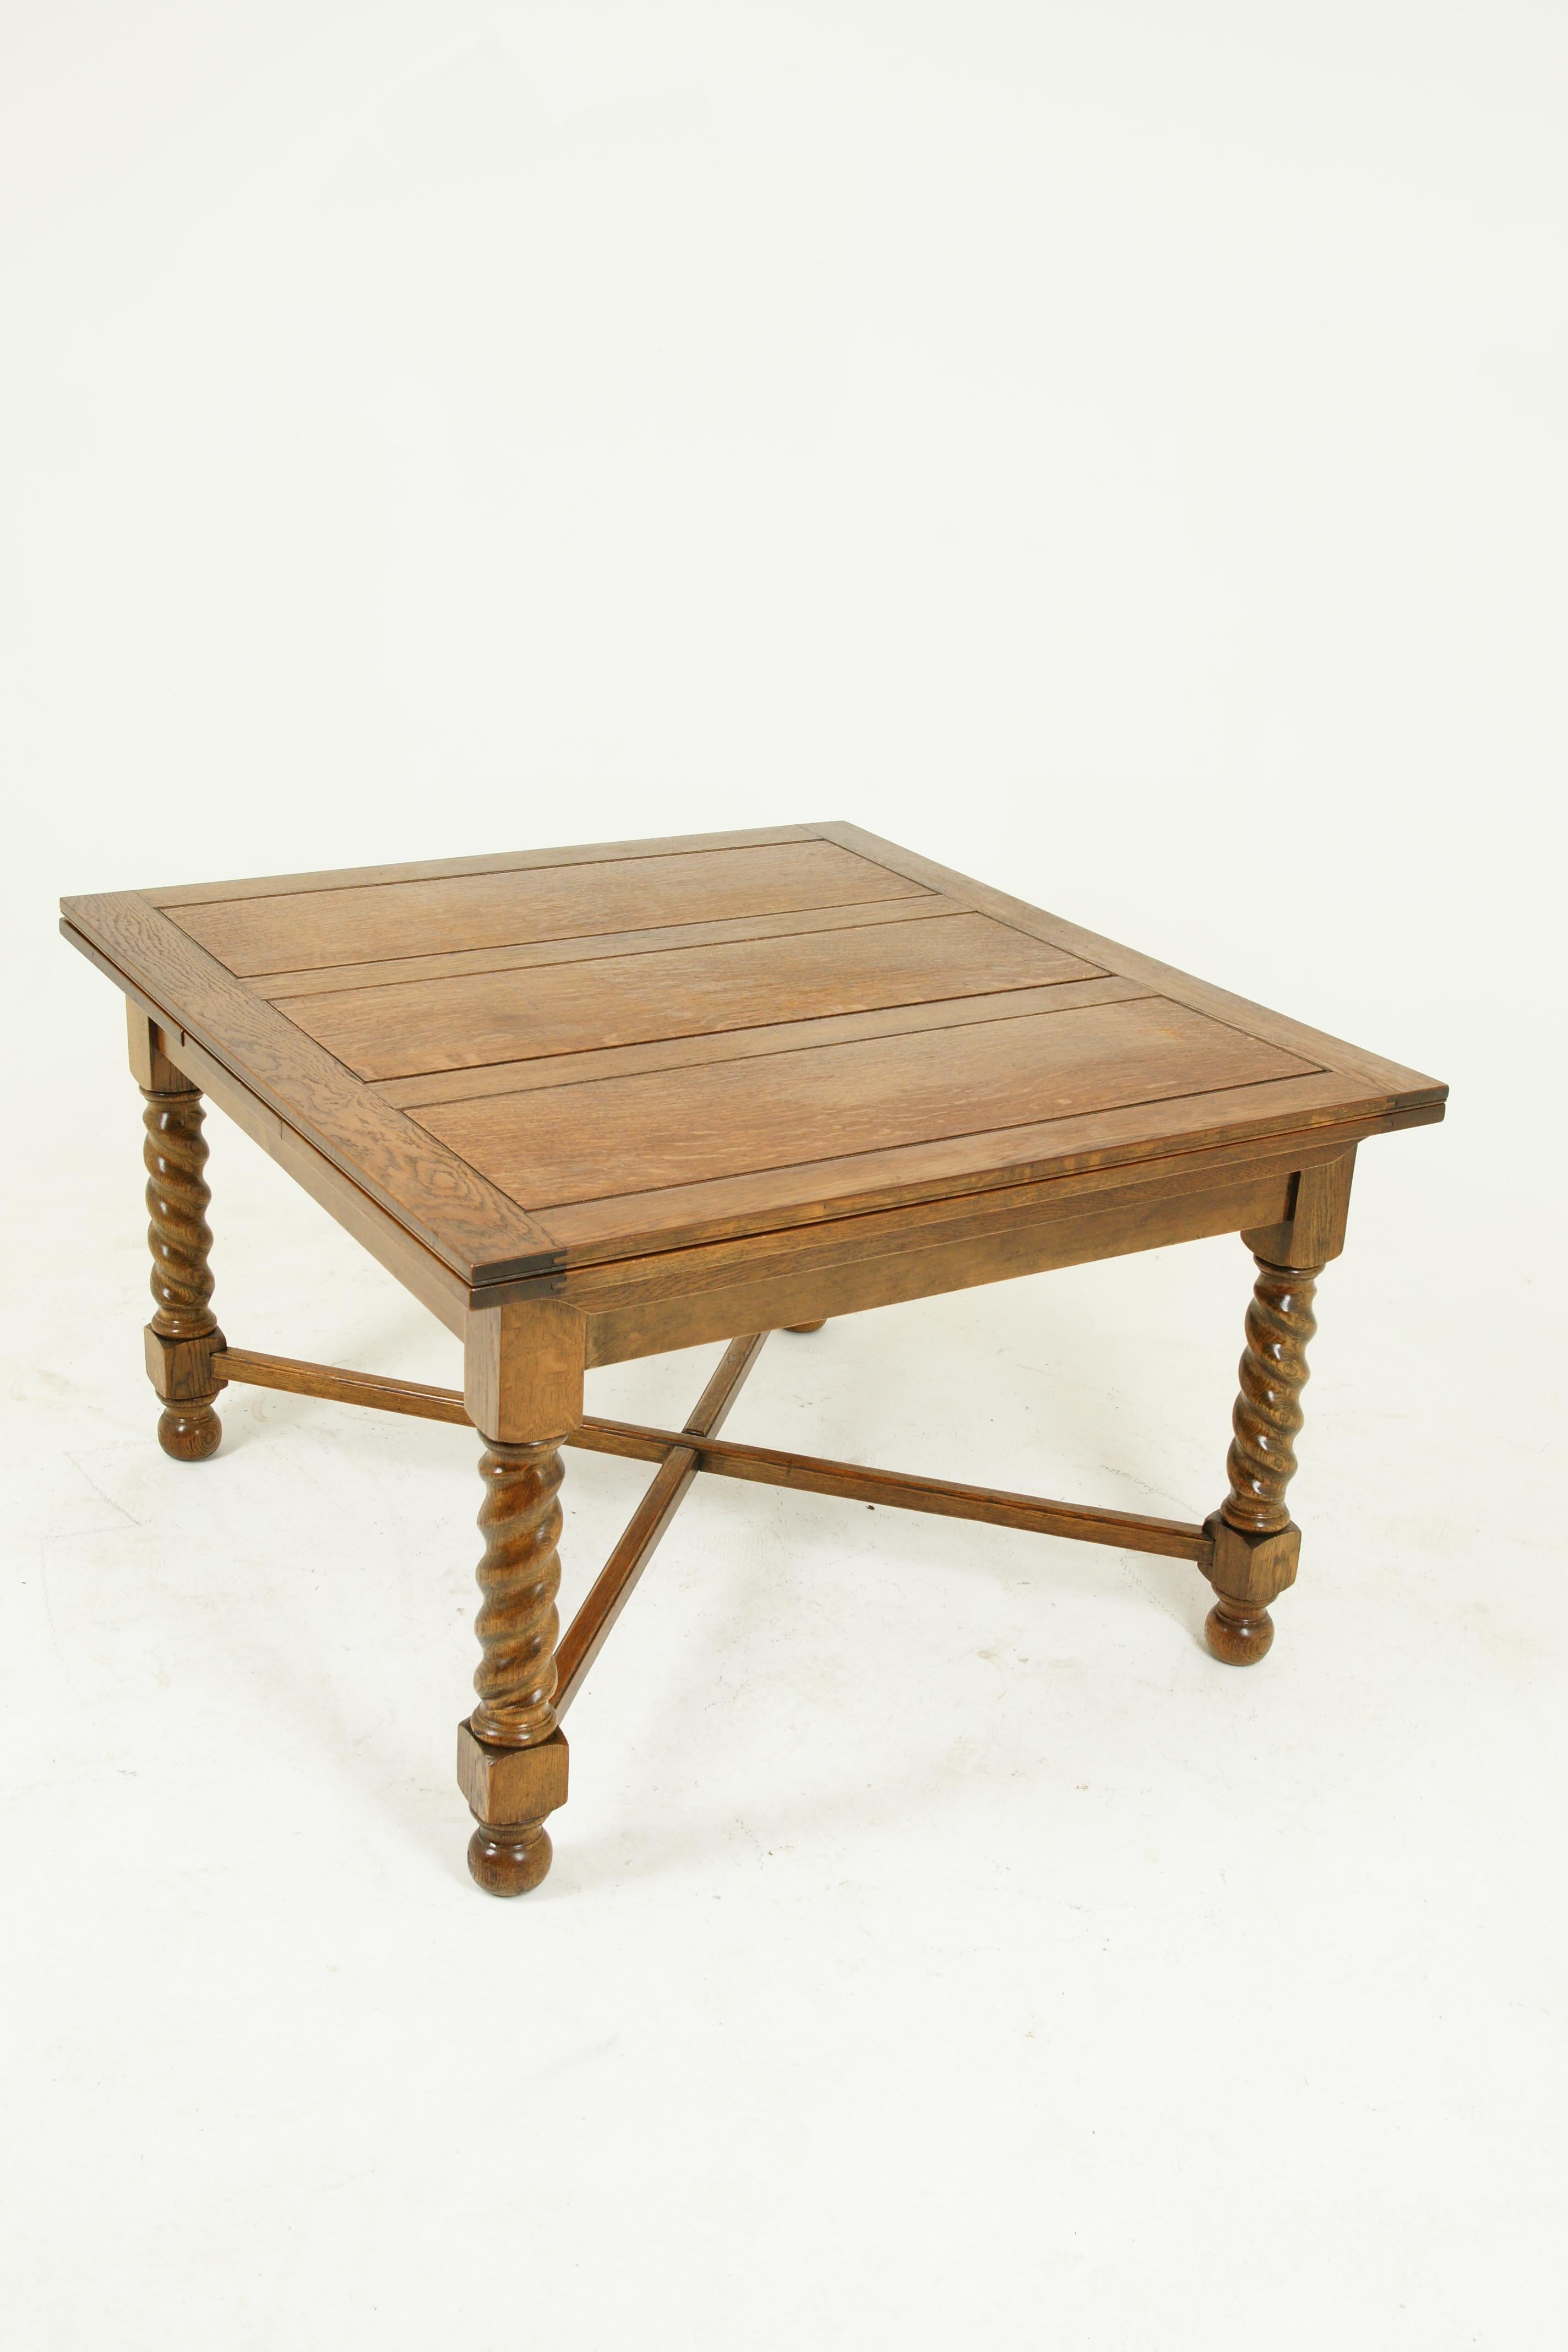 Scottish Antique Refectory Table, Antique Dining Table, Draw Leaf Table, 1920